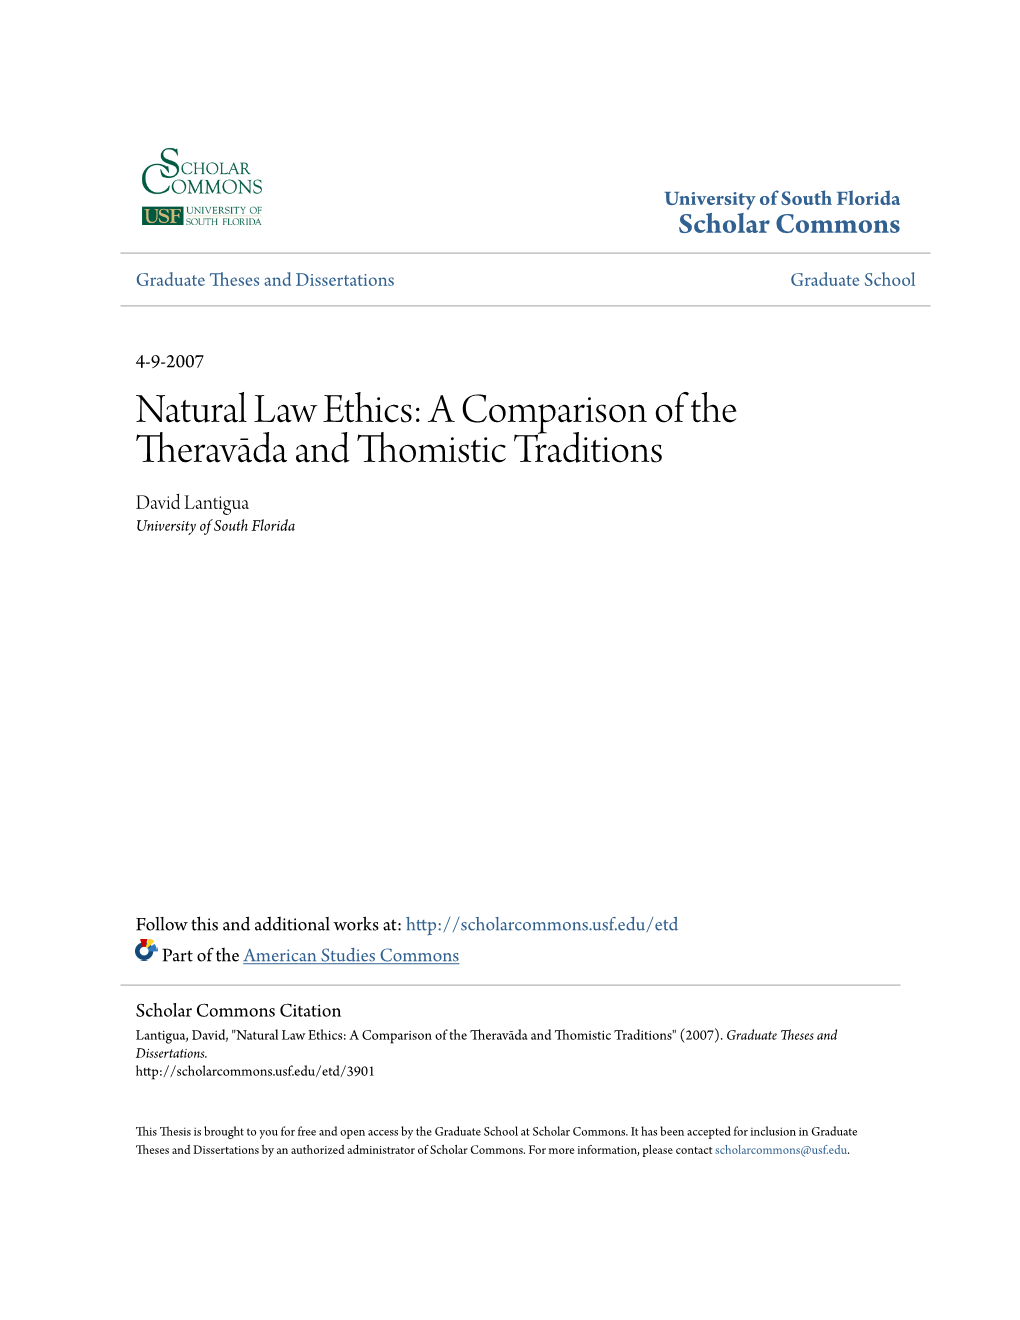 Natural Law Ethics: a Comparison of the Theravāda and Thomistic Traditions David Lantigua University of South Florida